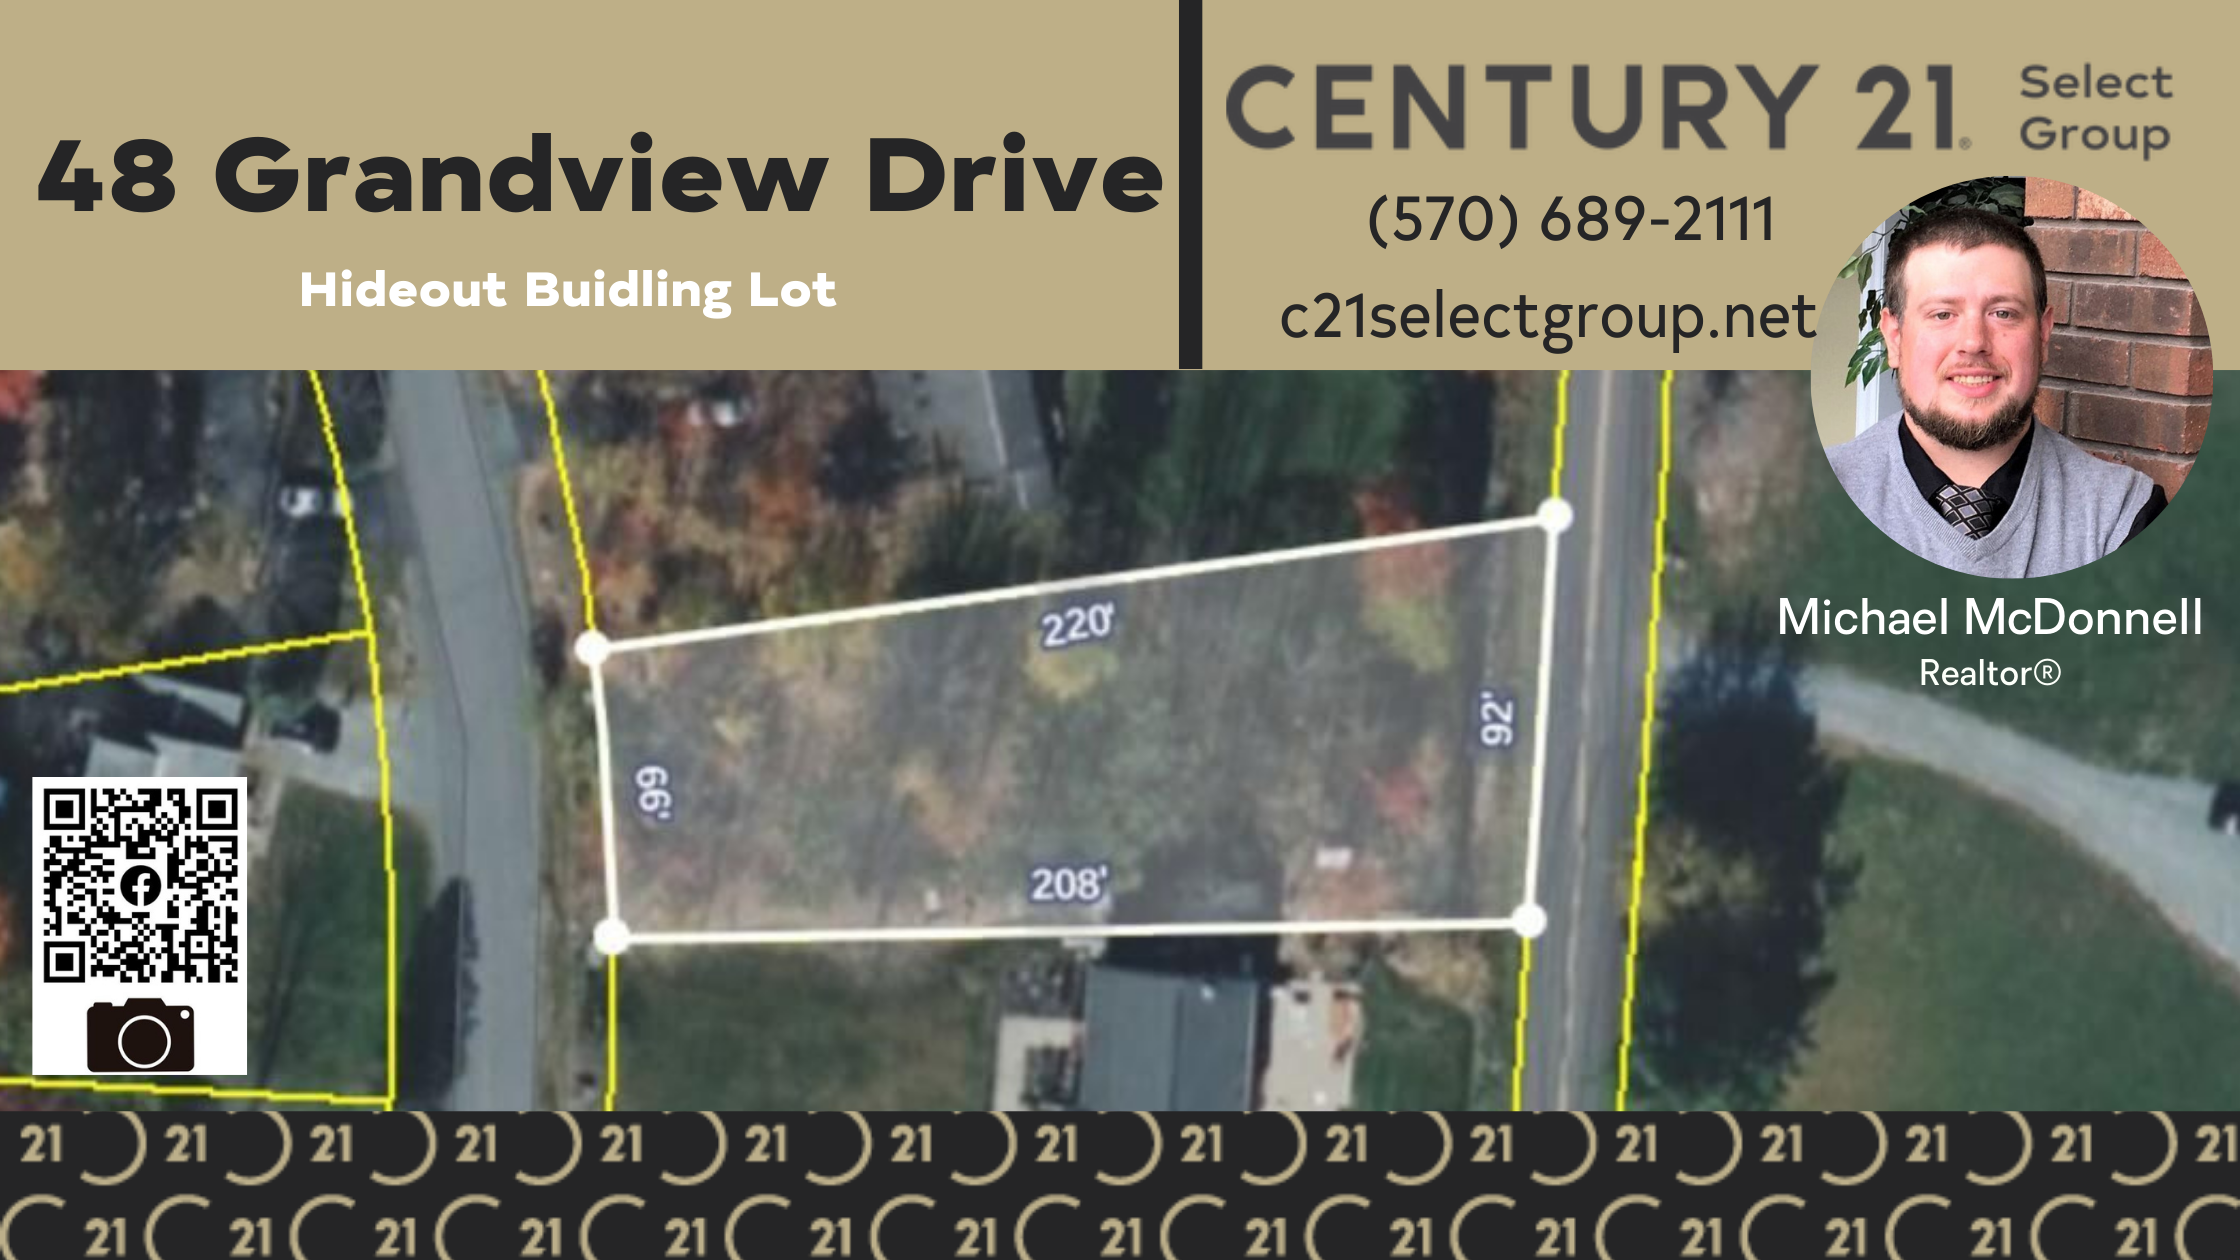 NEW PRICE! 48 Grandview Drive: Forested Building Lot in The Hideout Community